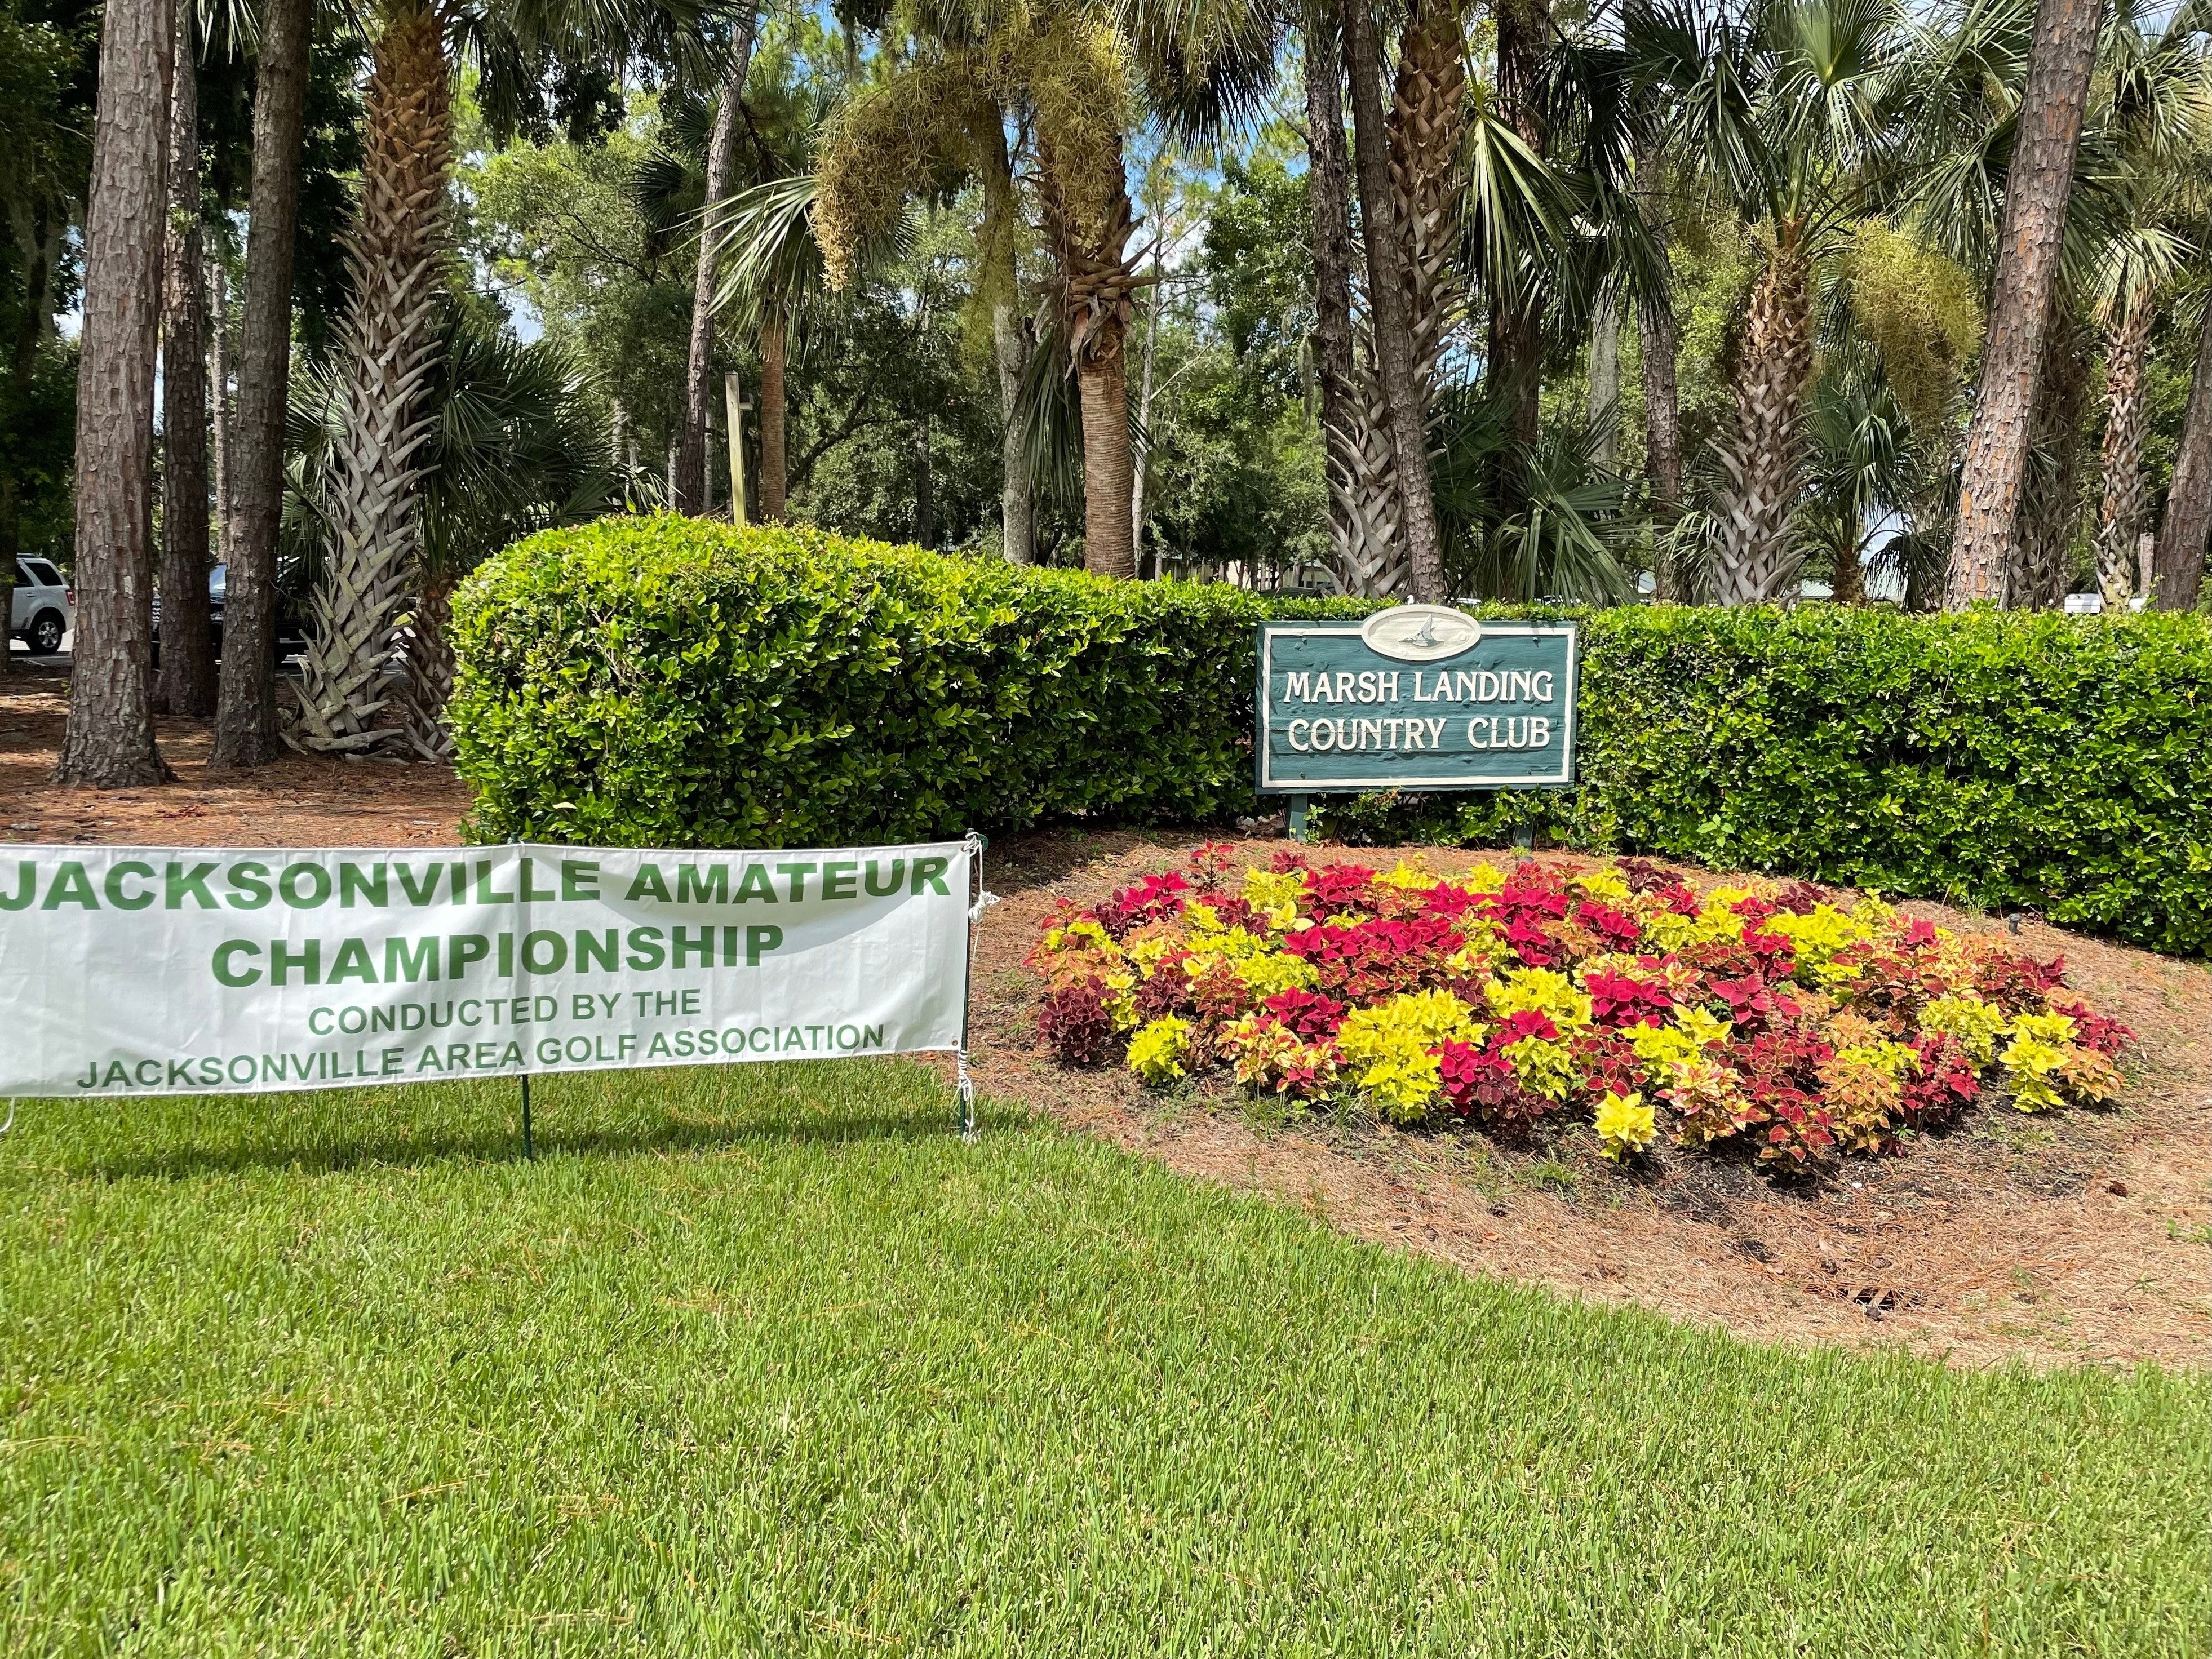 Marsh Landing Country Club acquired by Concert Golf Partners of Lake Mary